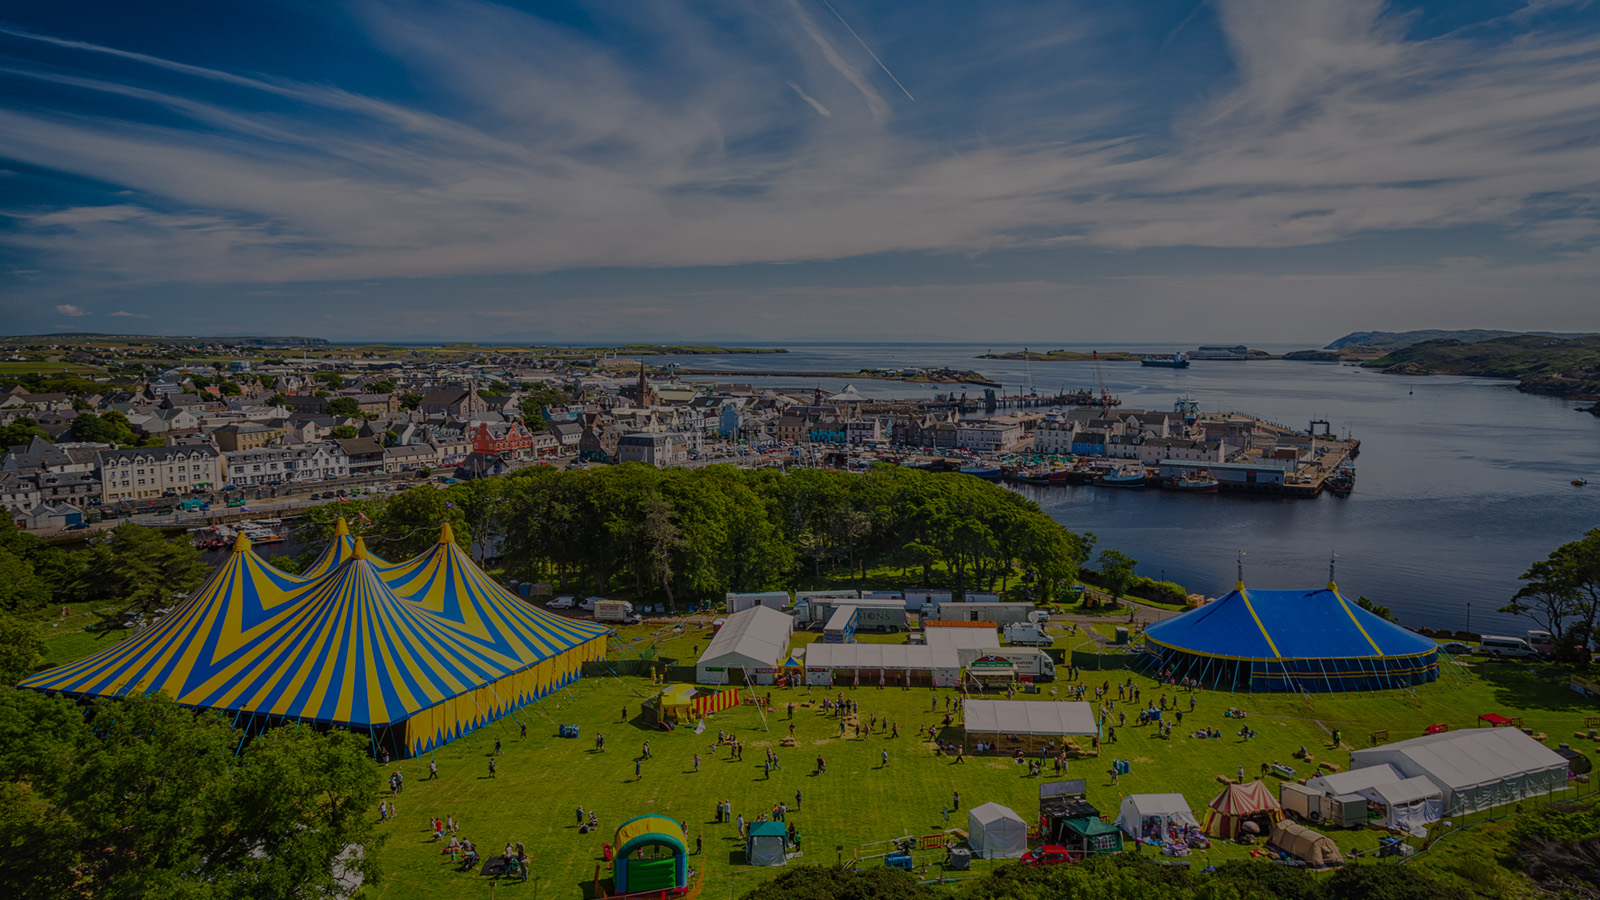 The HebCelt festival as seen from the sky. Several large colourful tents dots a green landscape filled with crowds on a a bright sunny day.